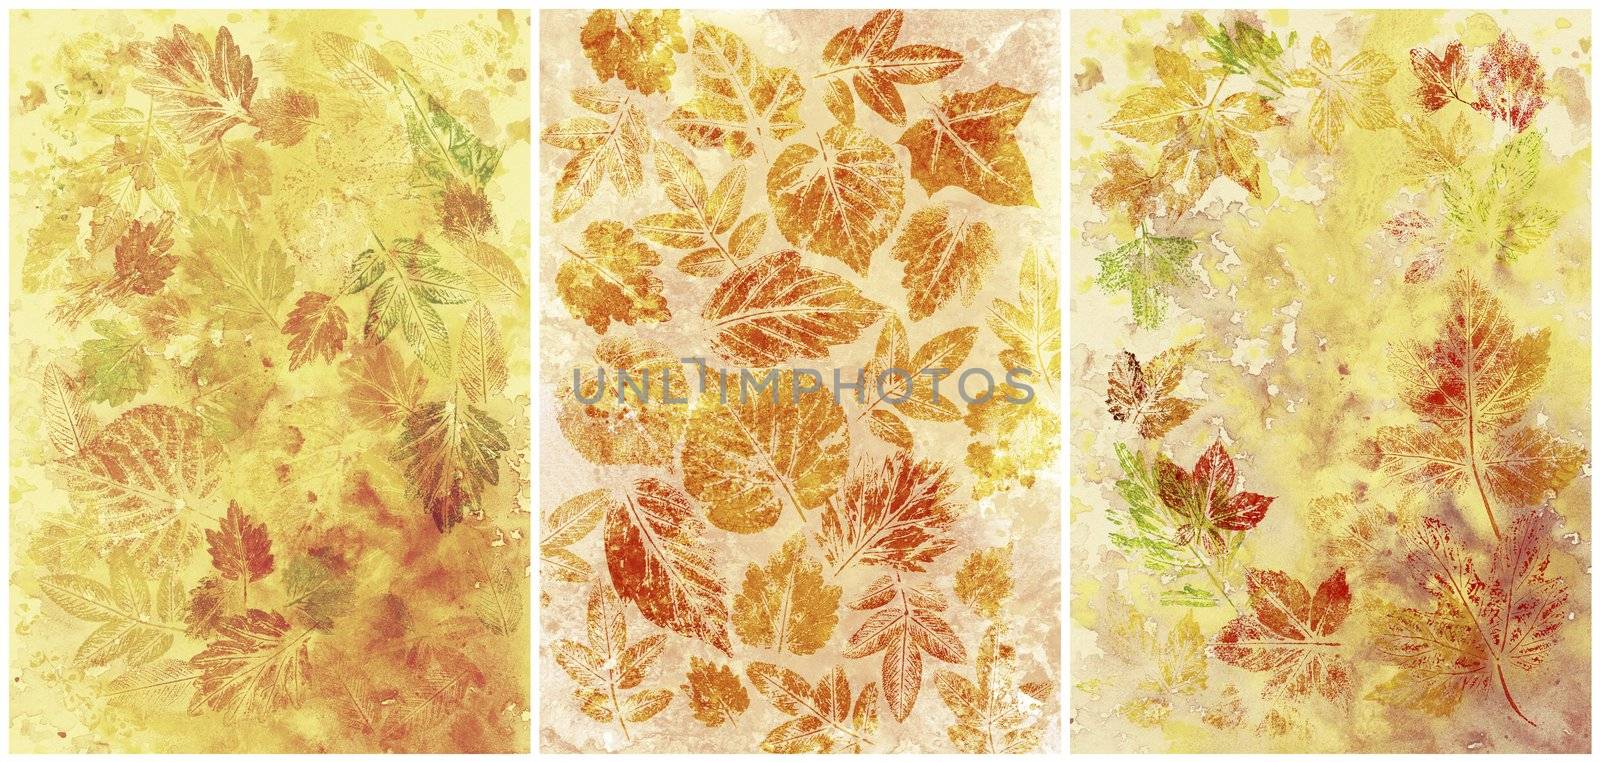 Abstract backgrounds, watercolor, leafs by alexcoolok